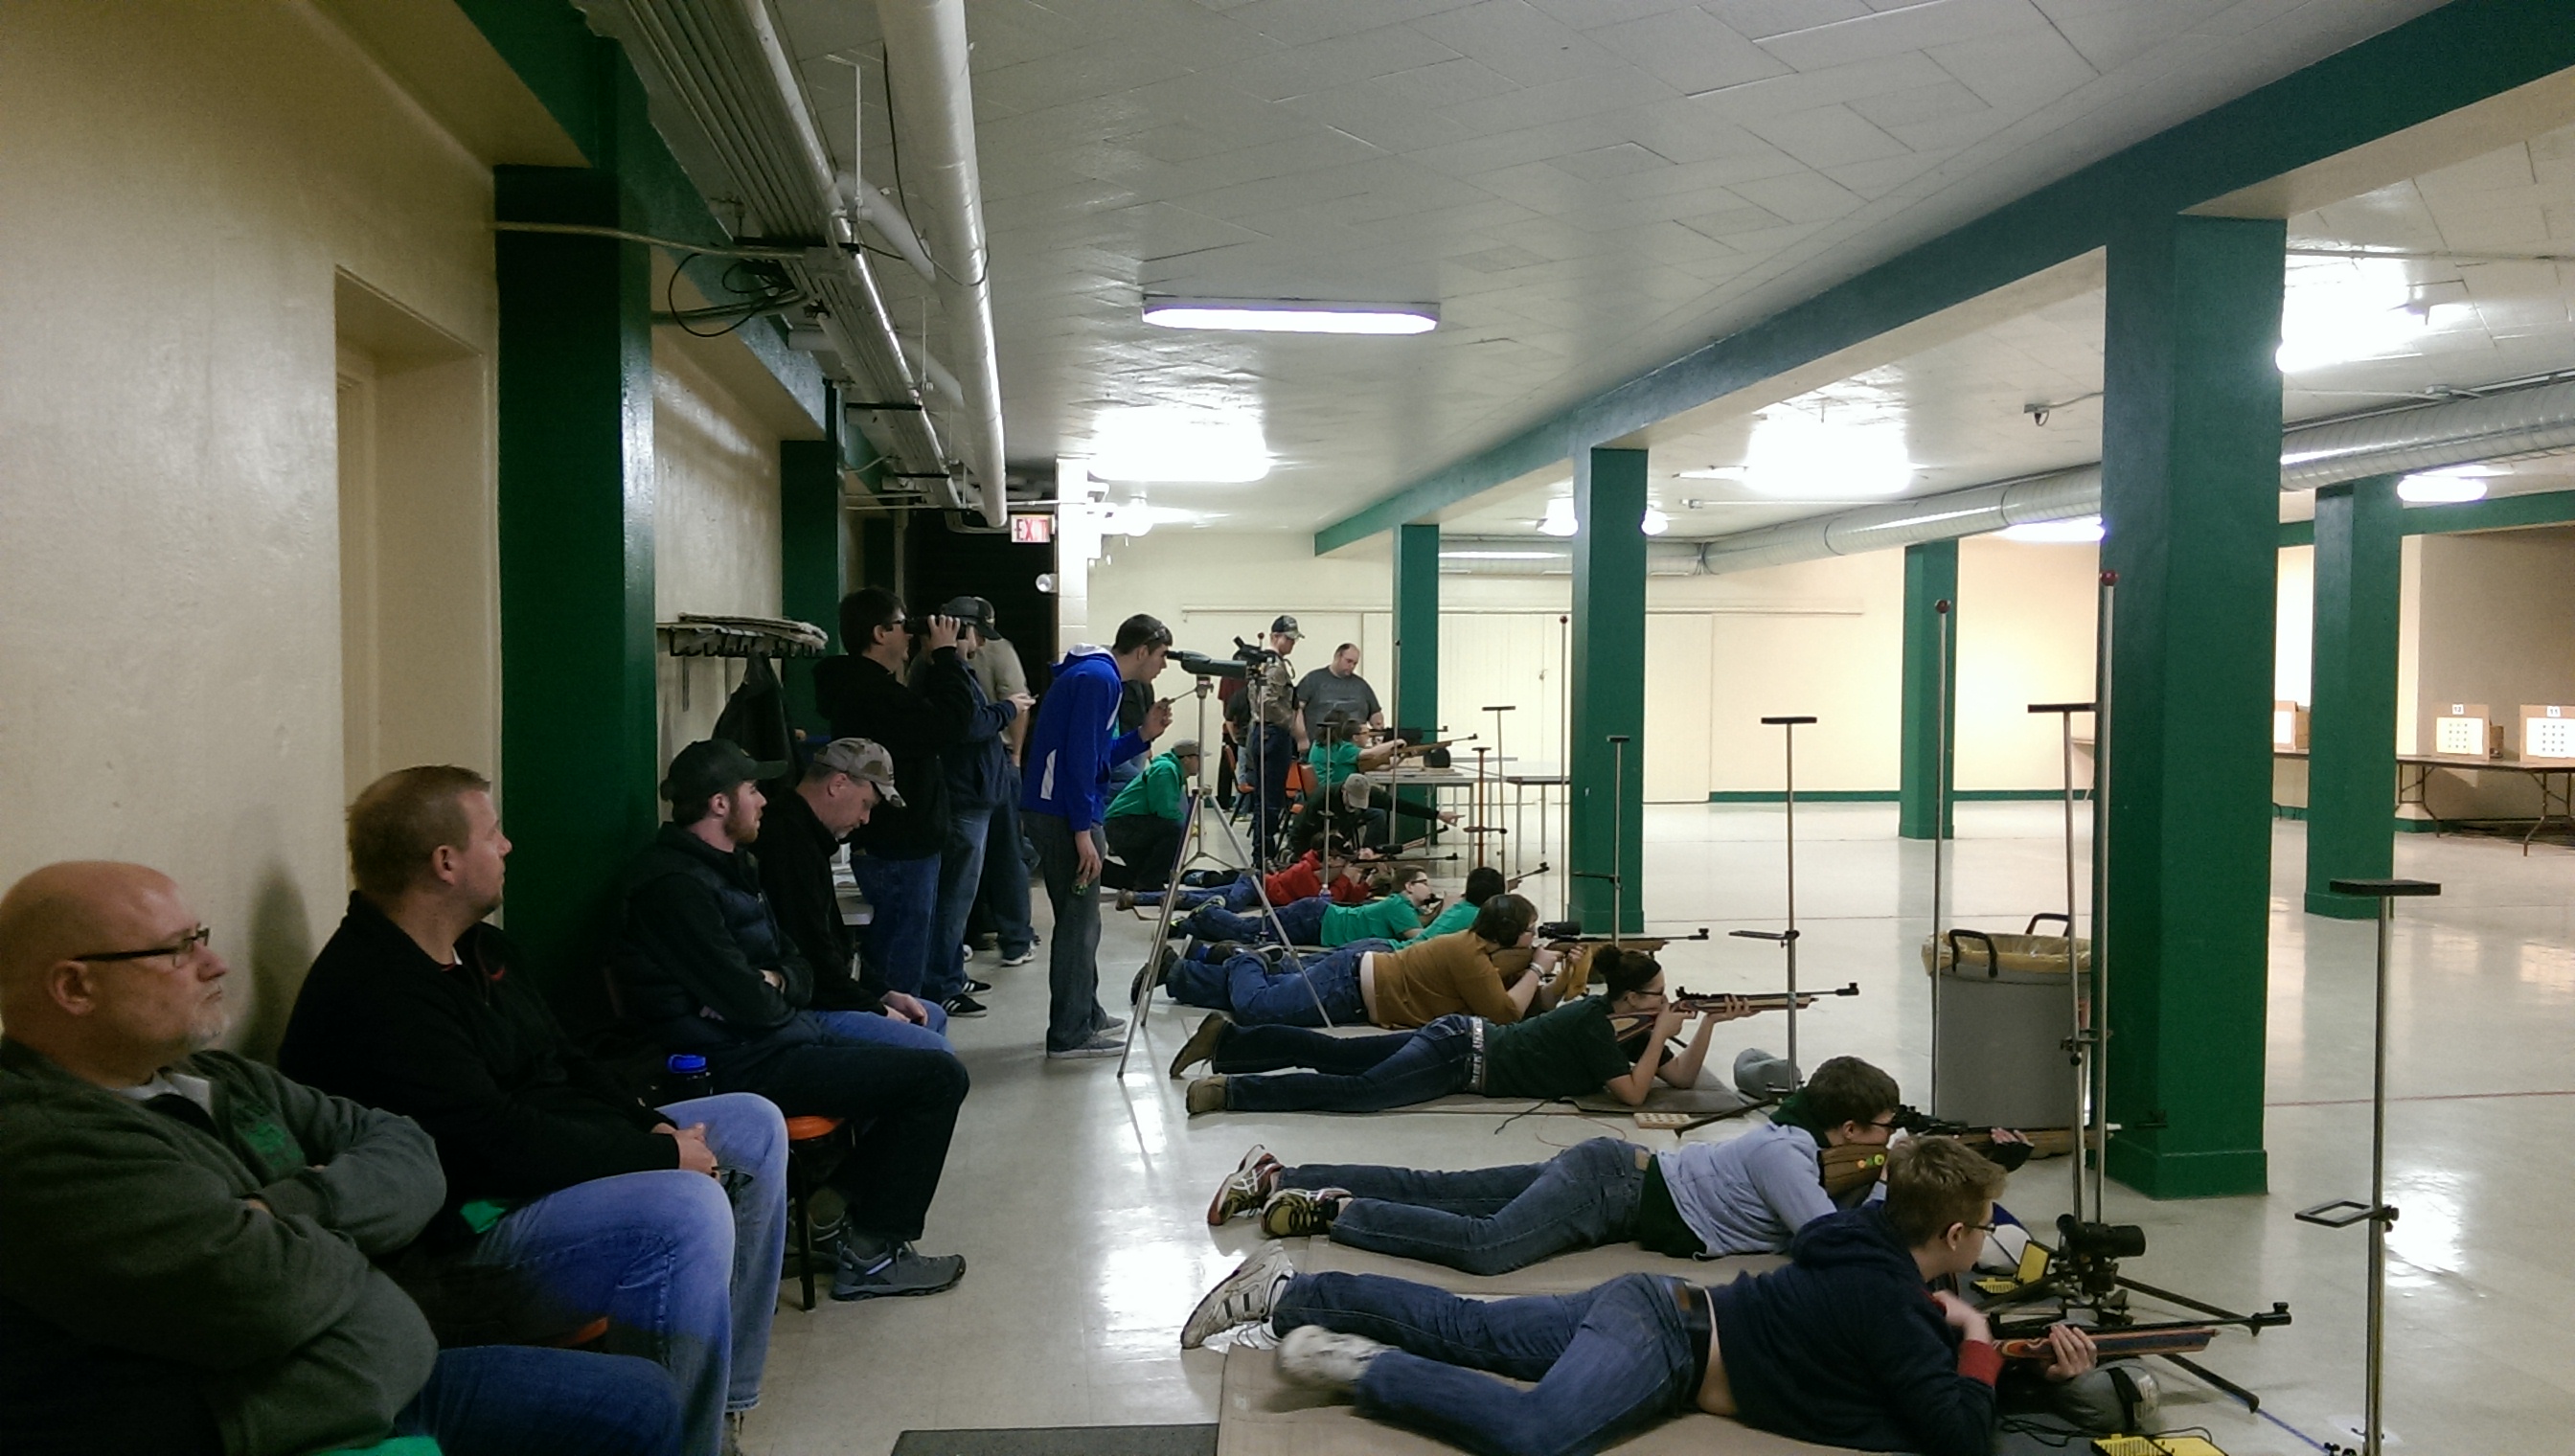 Youth compete in the senior division of the three-position event at the 2015 4-H state air rifle match in Devils Lake while parents watch. (NDSU photo)